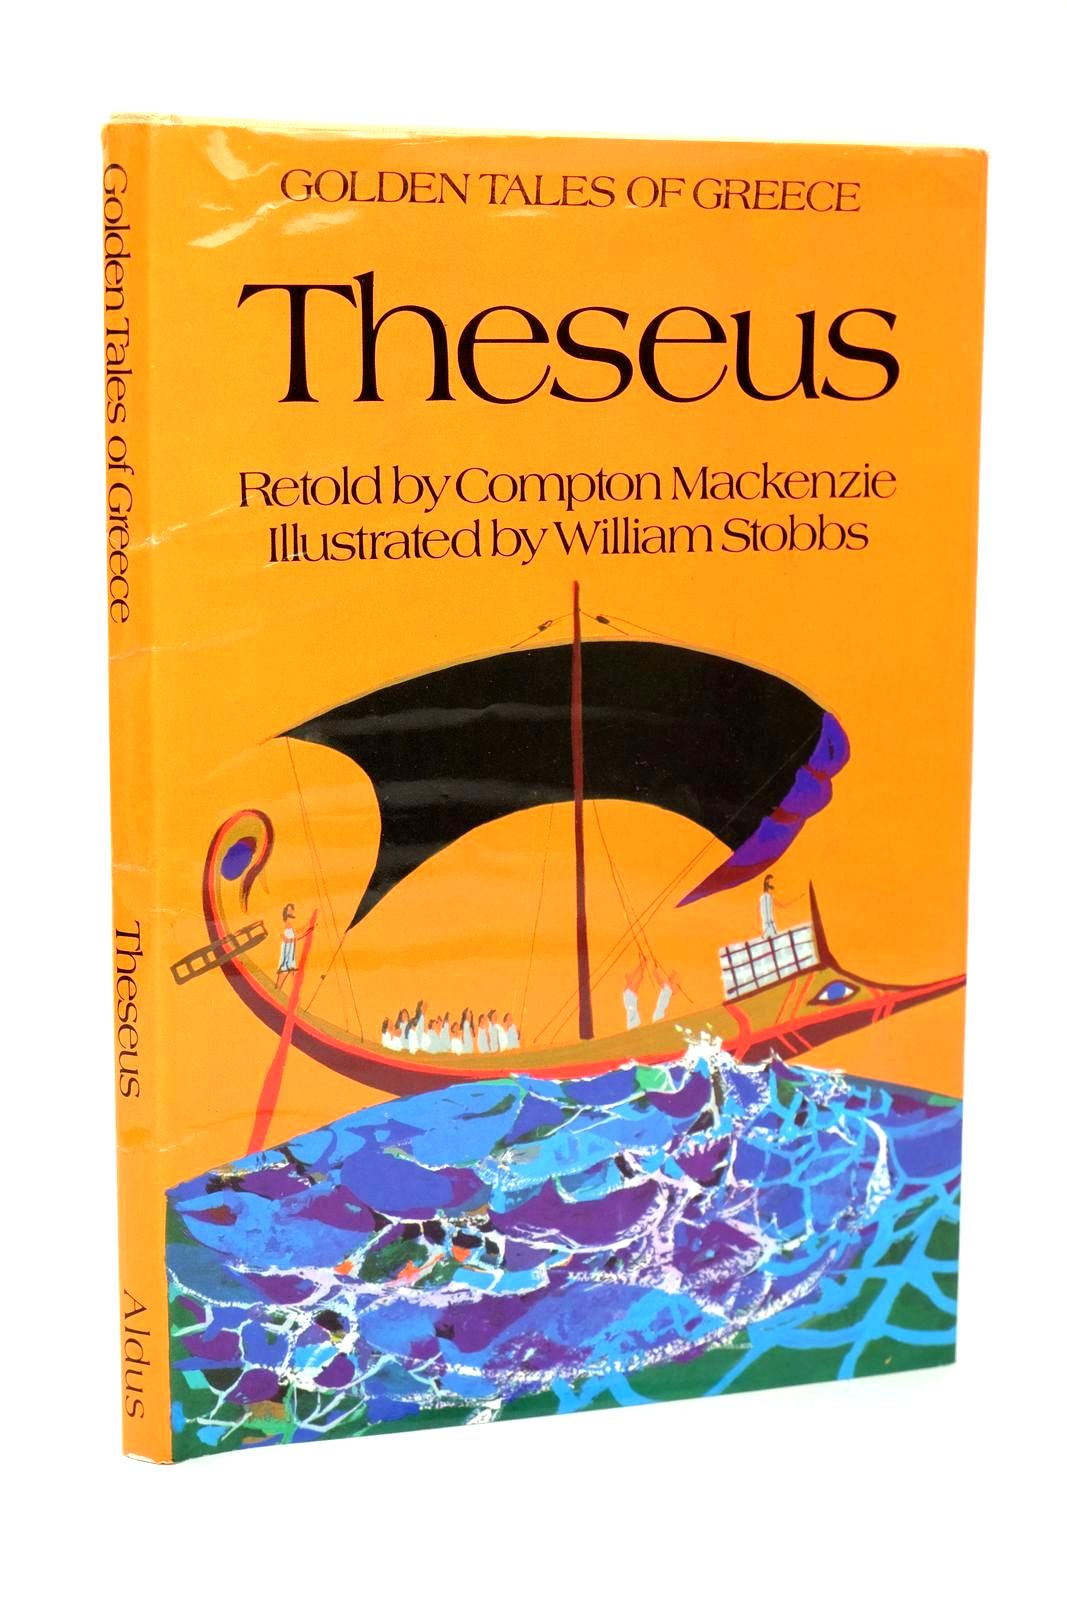 Photo of THESEUS - GOLDEN TALES OF GREECE written by Mackenzie, Compton illustrated by Stobbs, William published by Aldus Books (STOCK CODE: 1318527)  for sale by Stella & Rose's Books